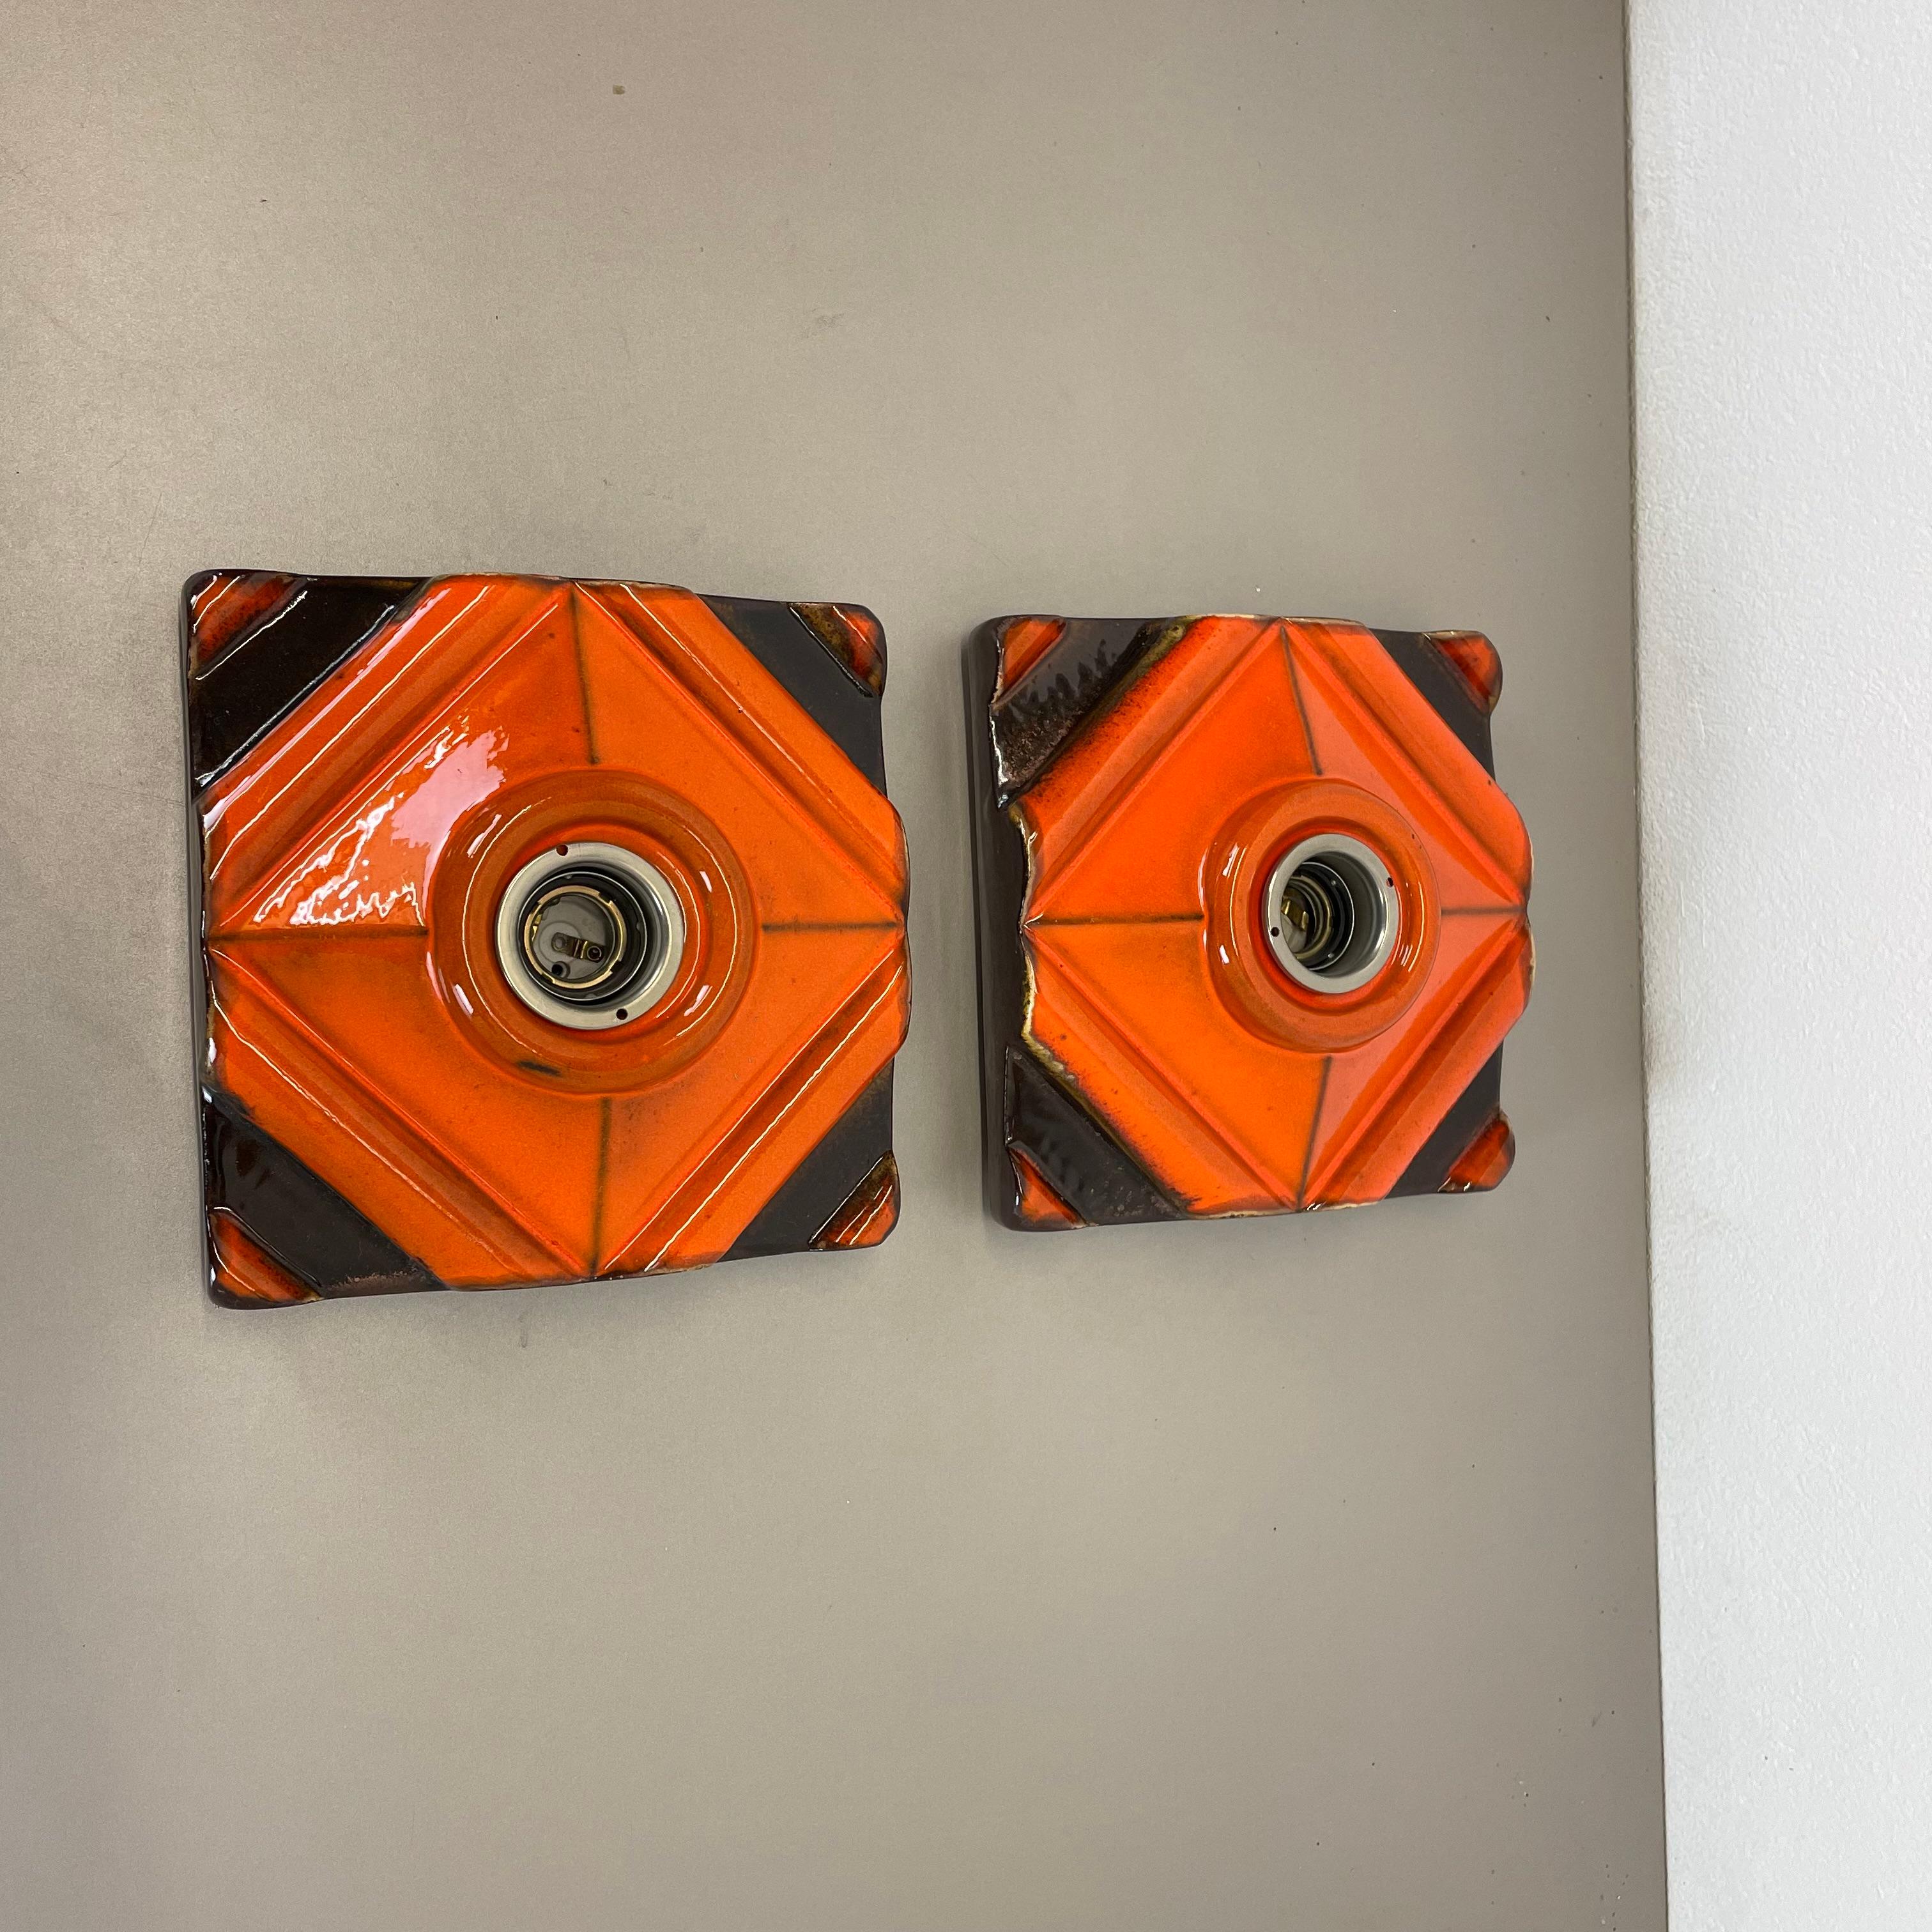 Article:

Wall light sconce set of two.


Producer:

Pan Ceramic, Germany.



Origin:

Germany.



Age:

1970s.



Description:

Original 1970s modernist German wall light made of ceramic in fat lava optic. This super rare set of two walls light was